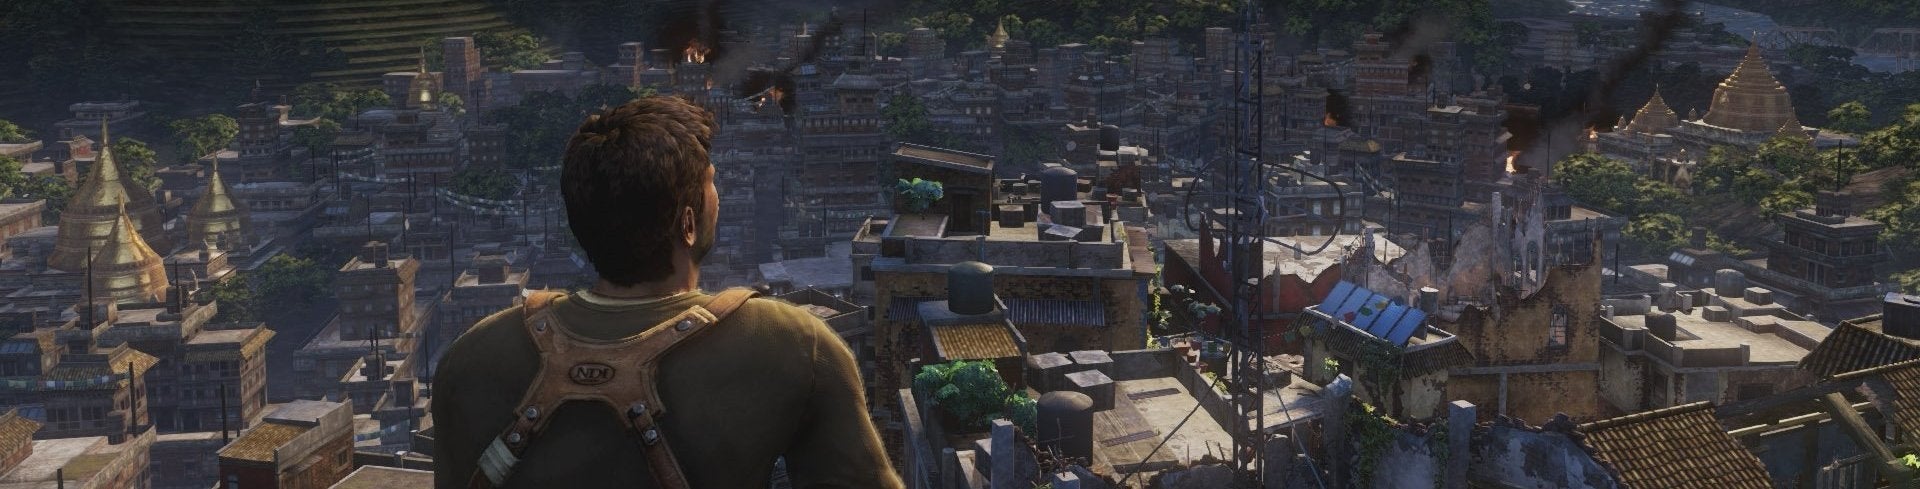 Image for Face-Off: Uncharted 2: Among Thieves on PS4